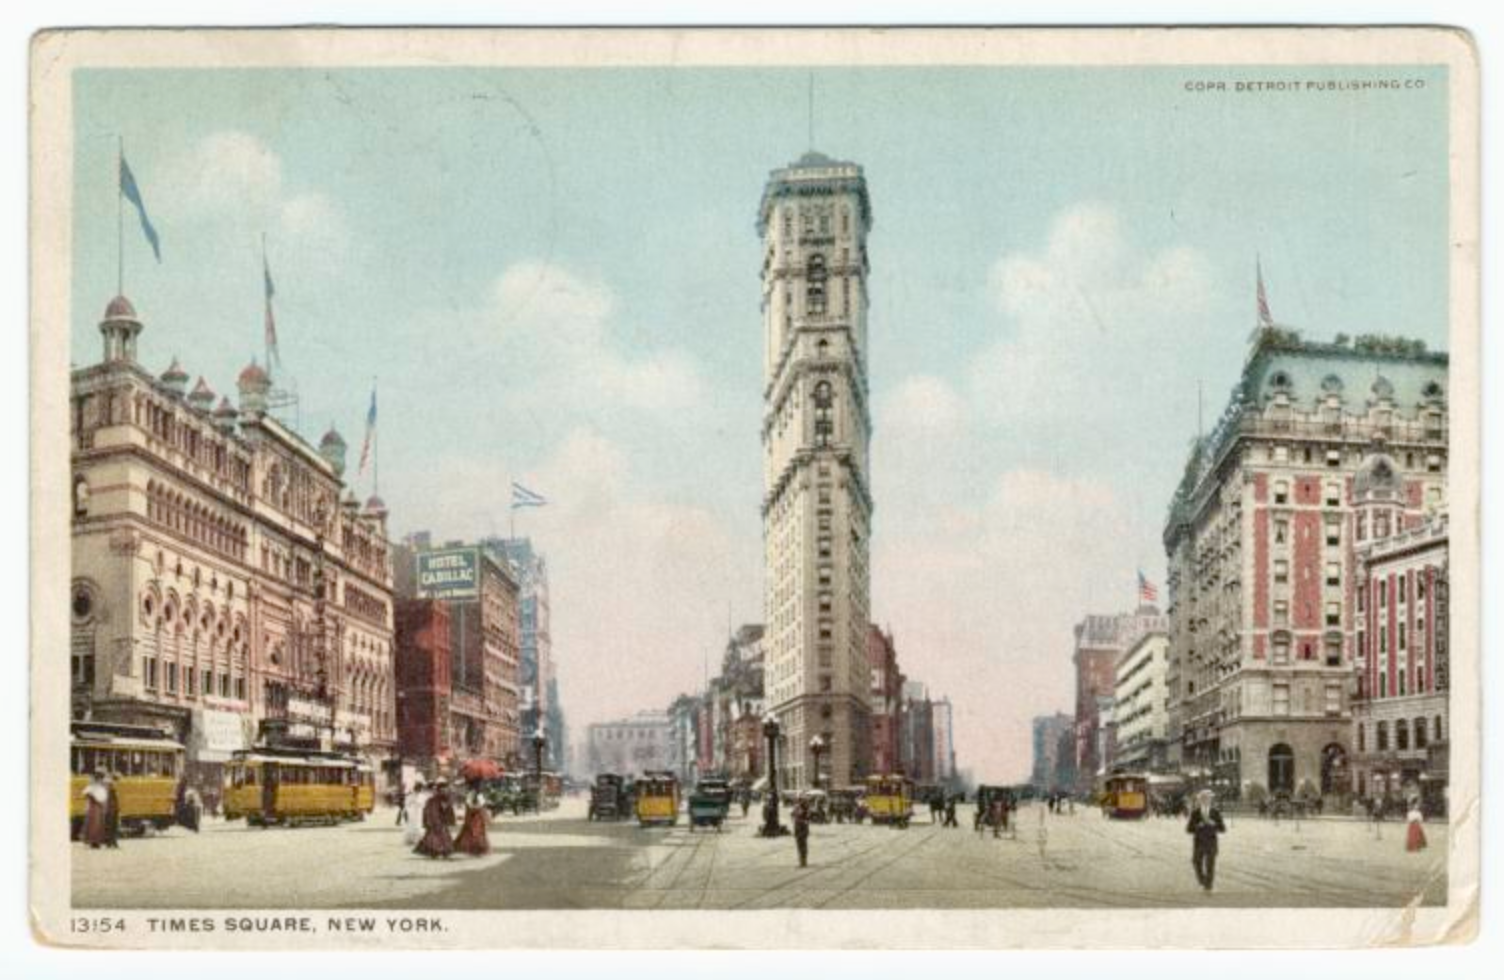 An early illustration of Times Square 